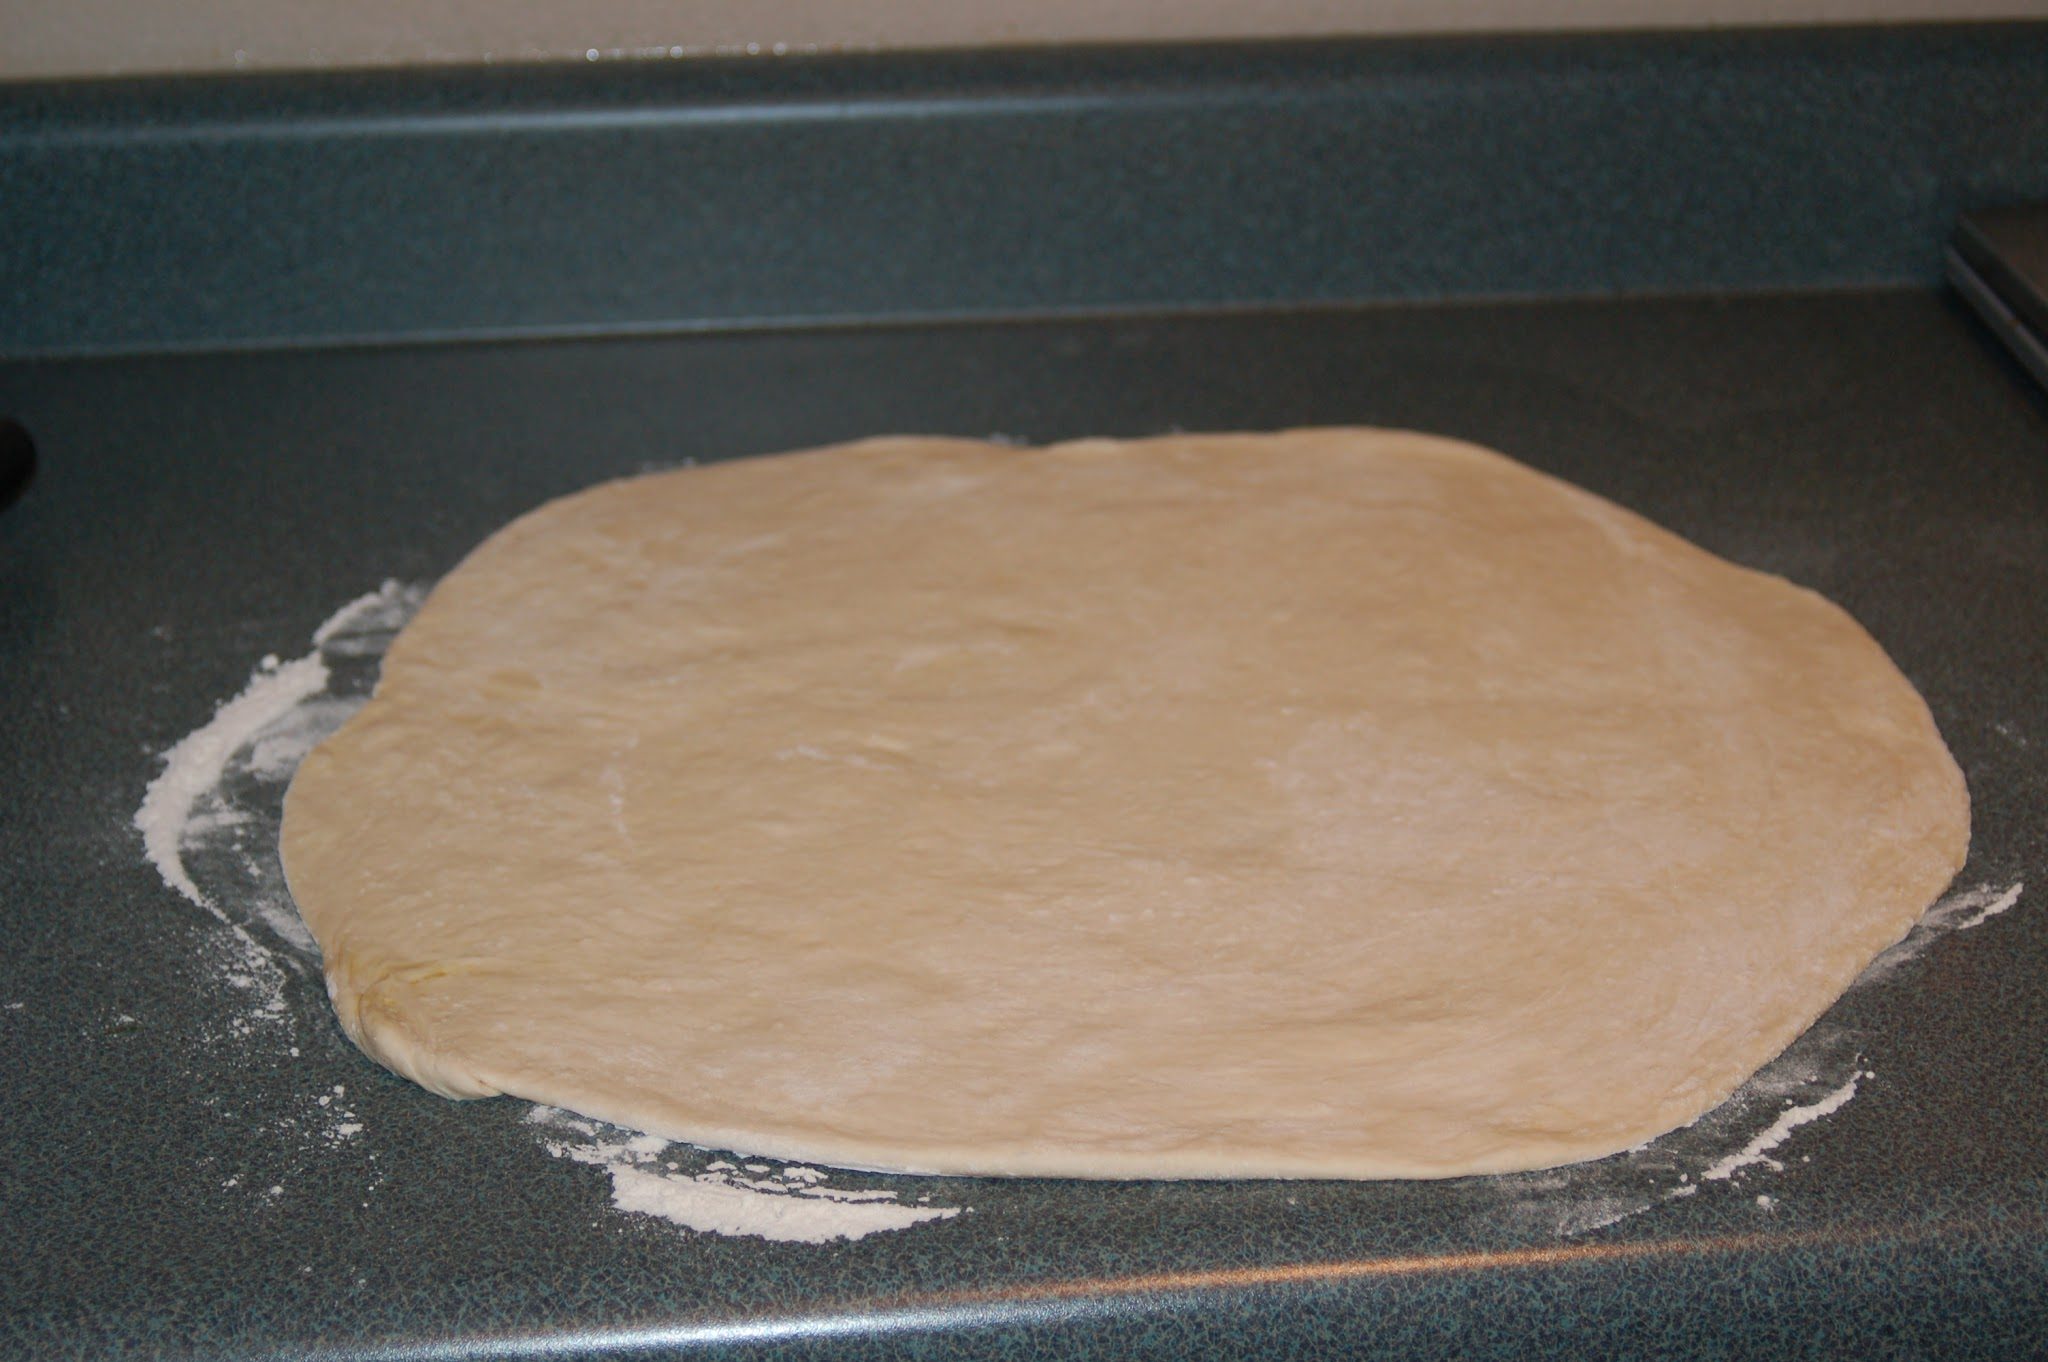 unbaked pizza crust